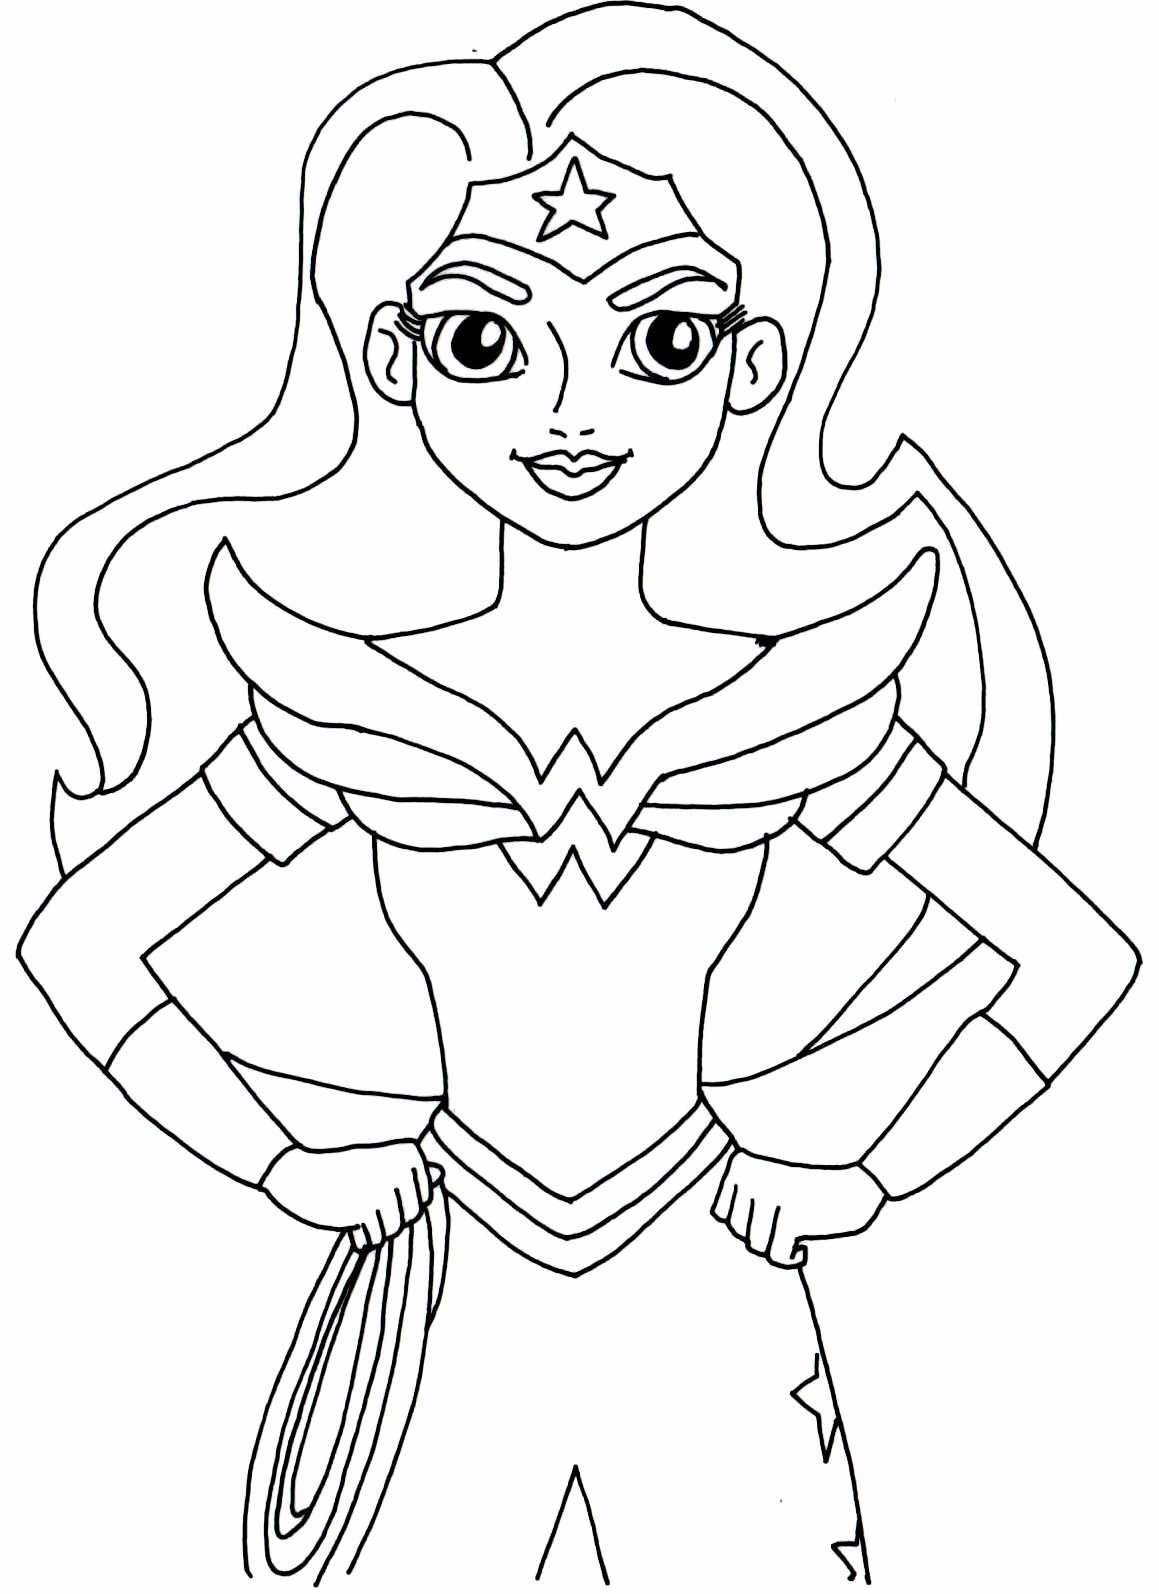 Free Superhero Coloring Pages Unique Free Printable Super Hero High Coloring Page for Wonder Woman More are Ing I Ll Keep This